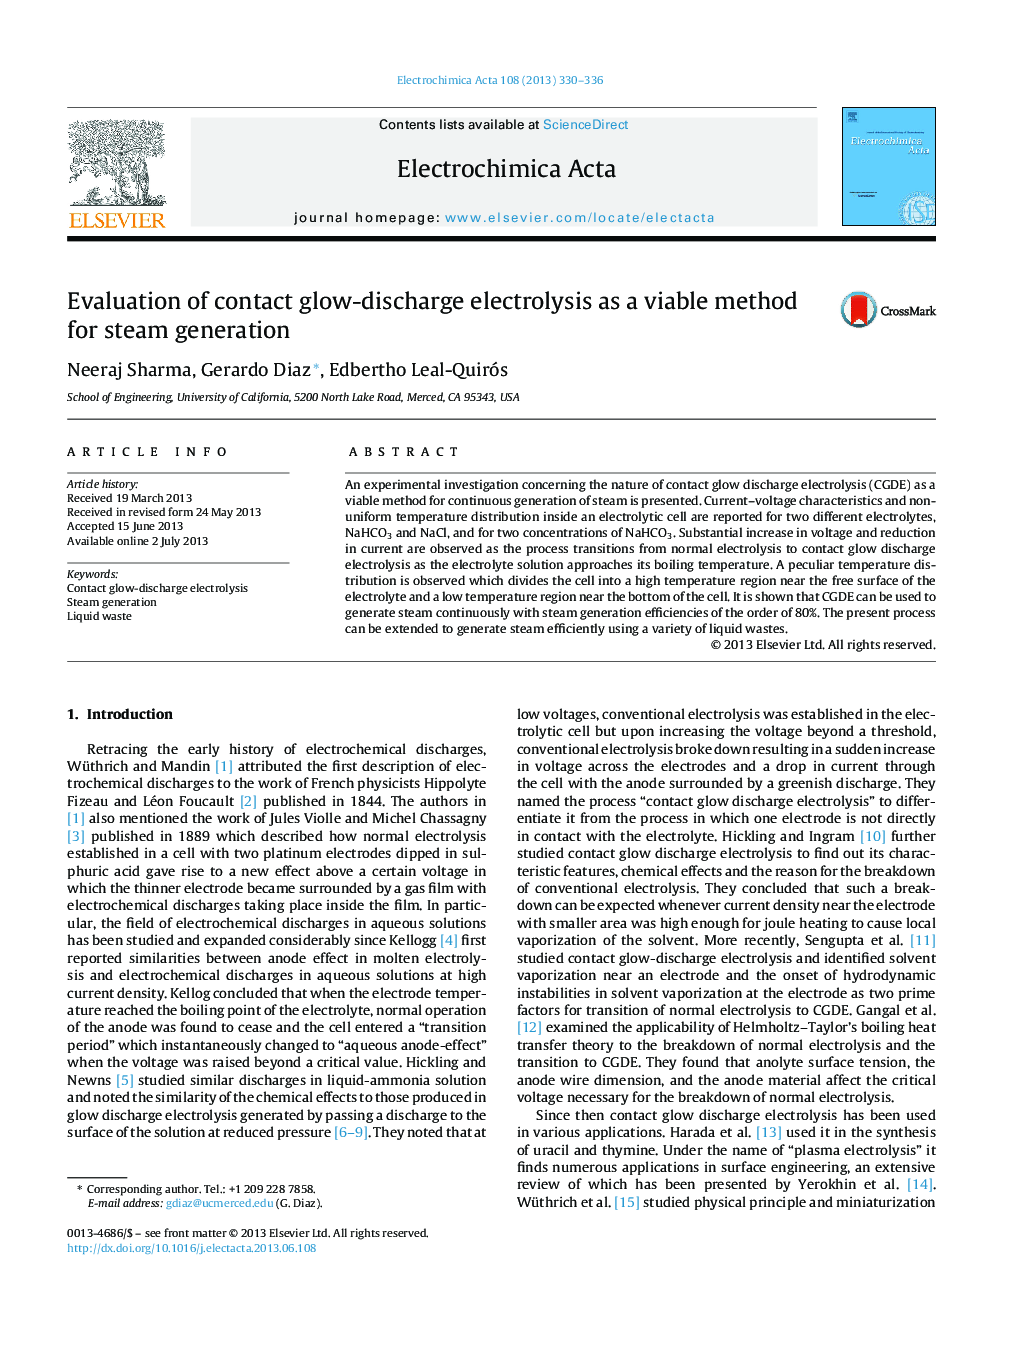 Evaluation of contact glow-discharge electrolysis as a viable method for steam generation